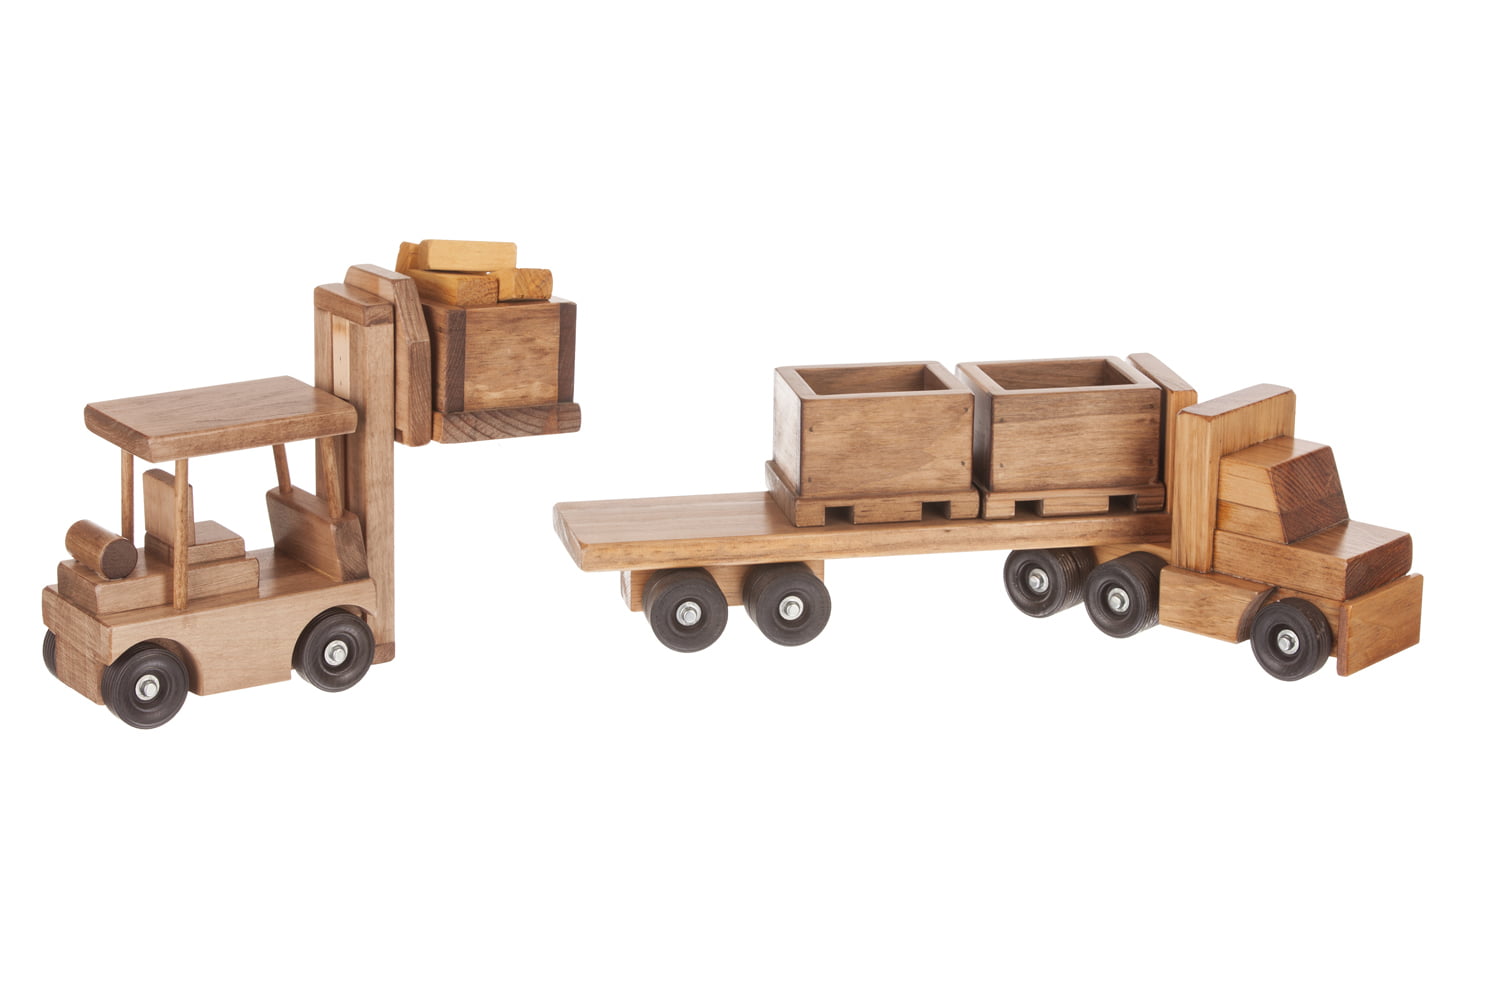 Wooden Toy Truck with Skid Trailer and 3 Skids - Optional Fork Lift Add On